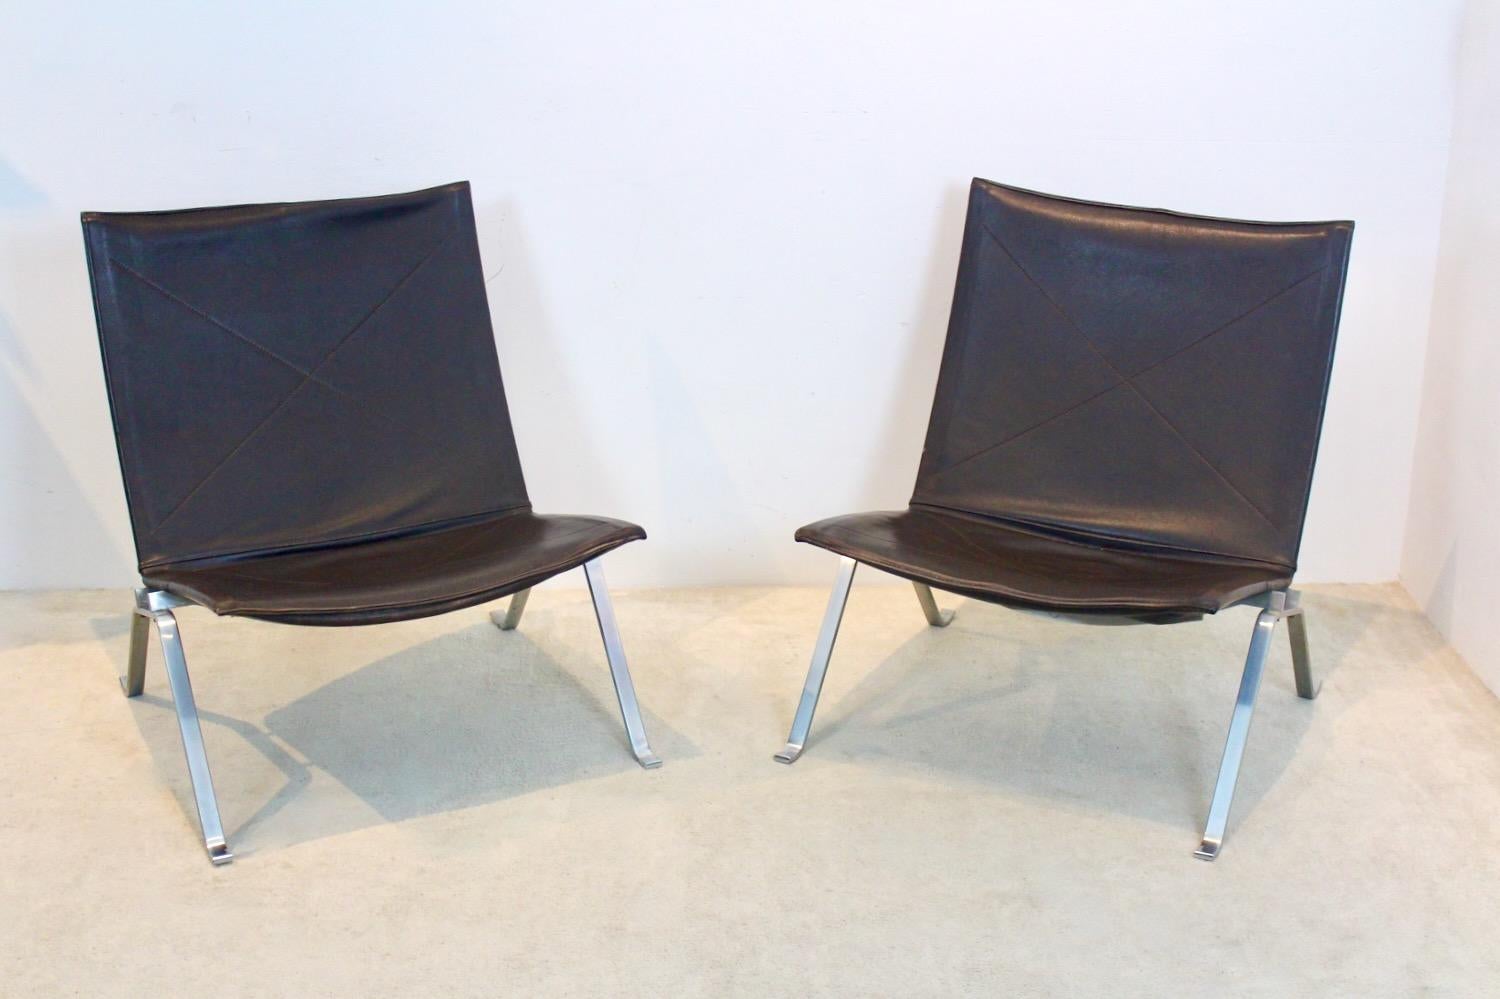 Stainless Steel Distinctive Set of Brown Leather PK 22 Chairs by Poul Kjærholm for Fritz Hansen For Sale